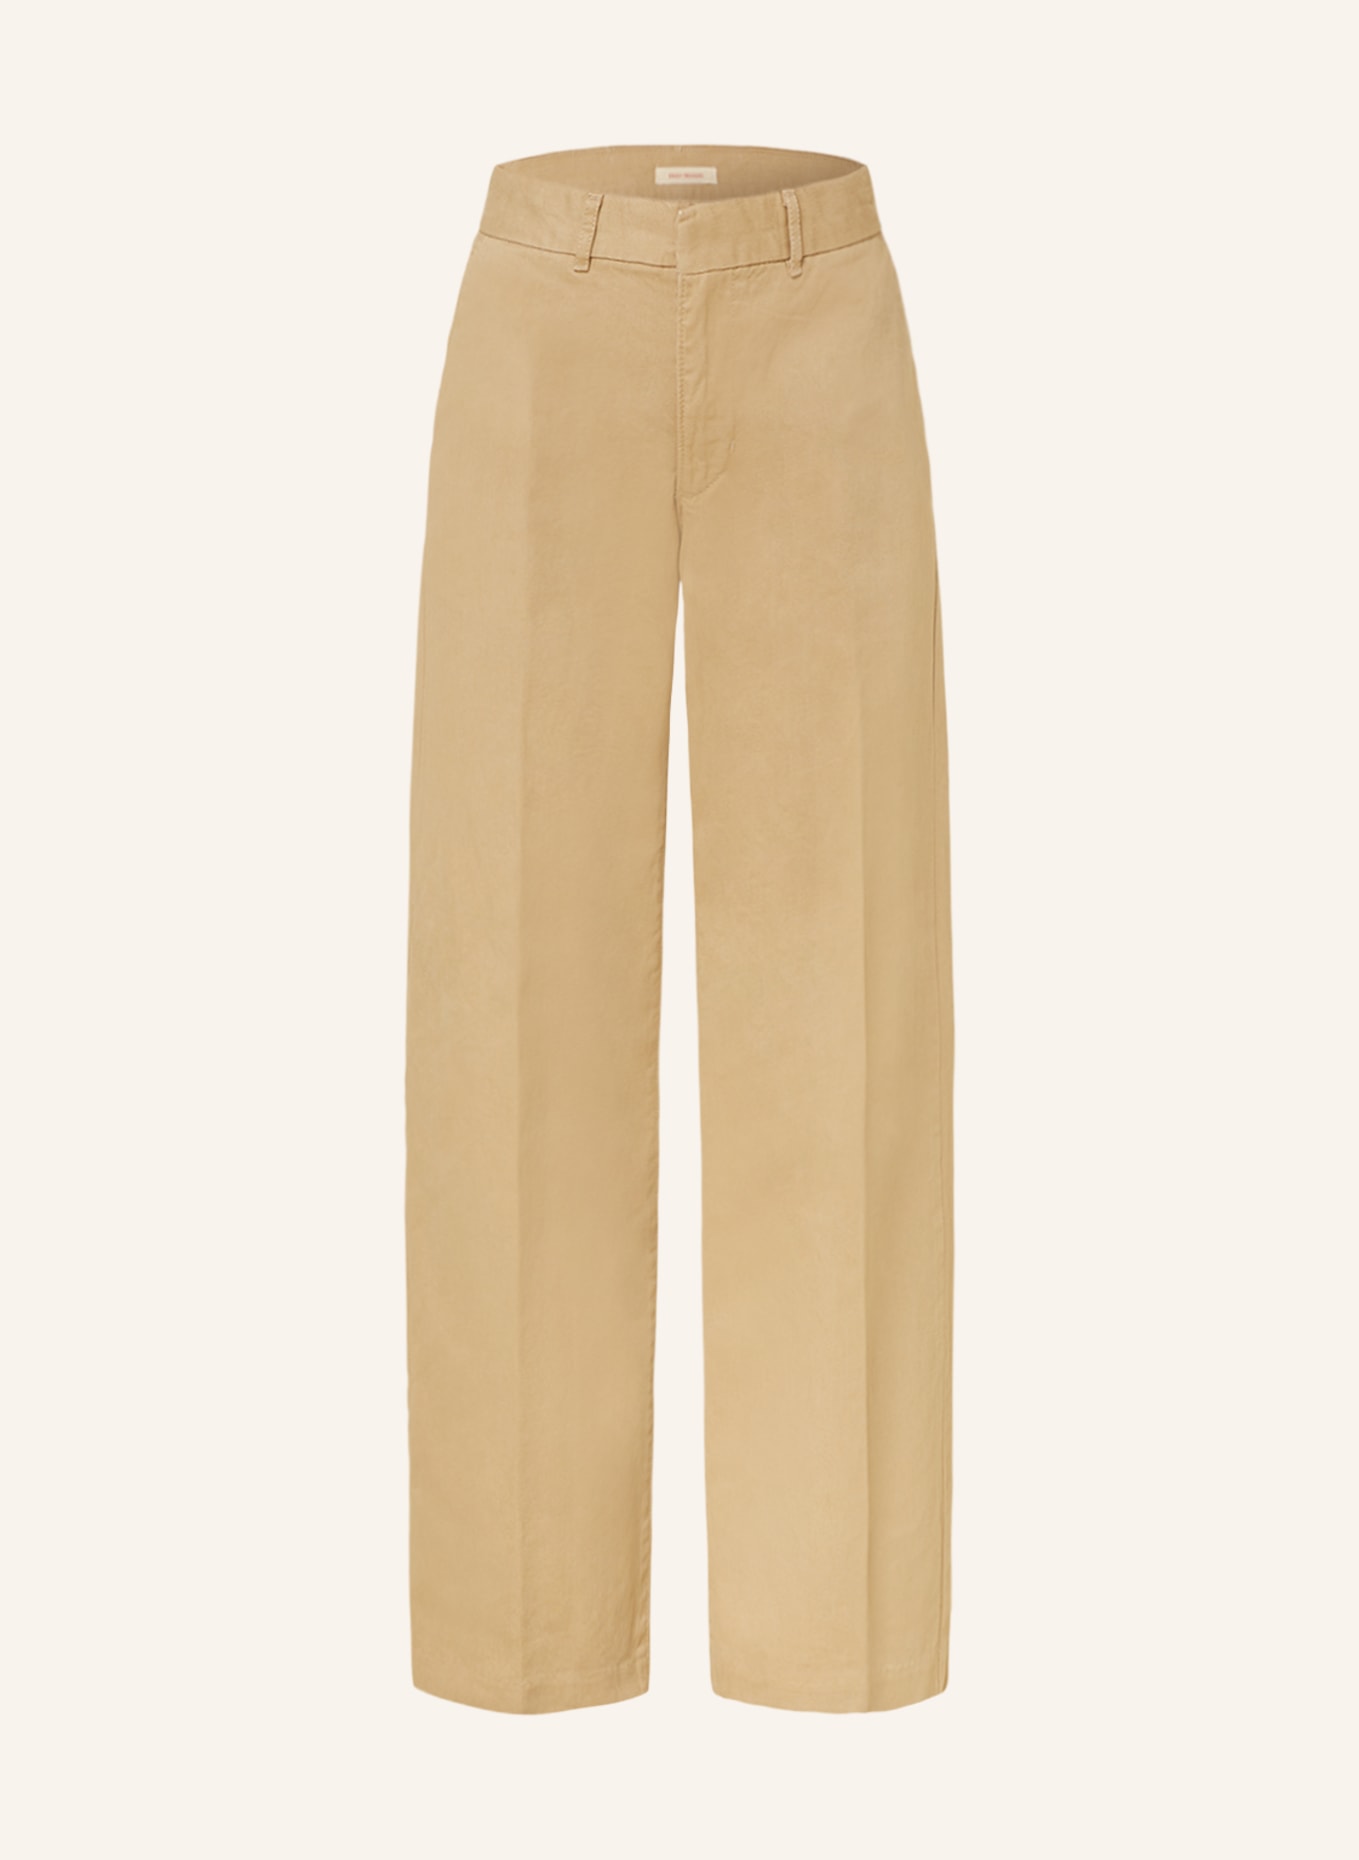 CHINO BAGGY TROUSER